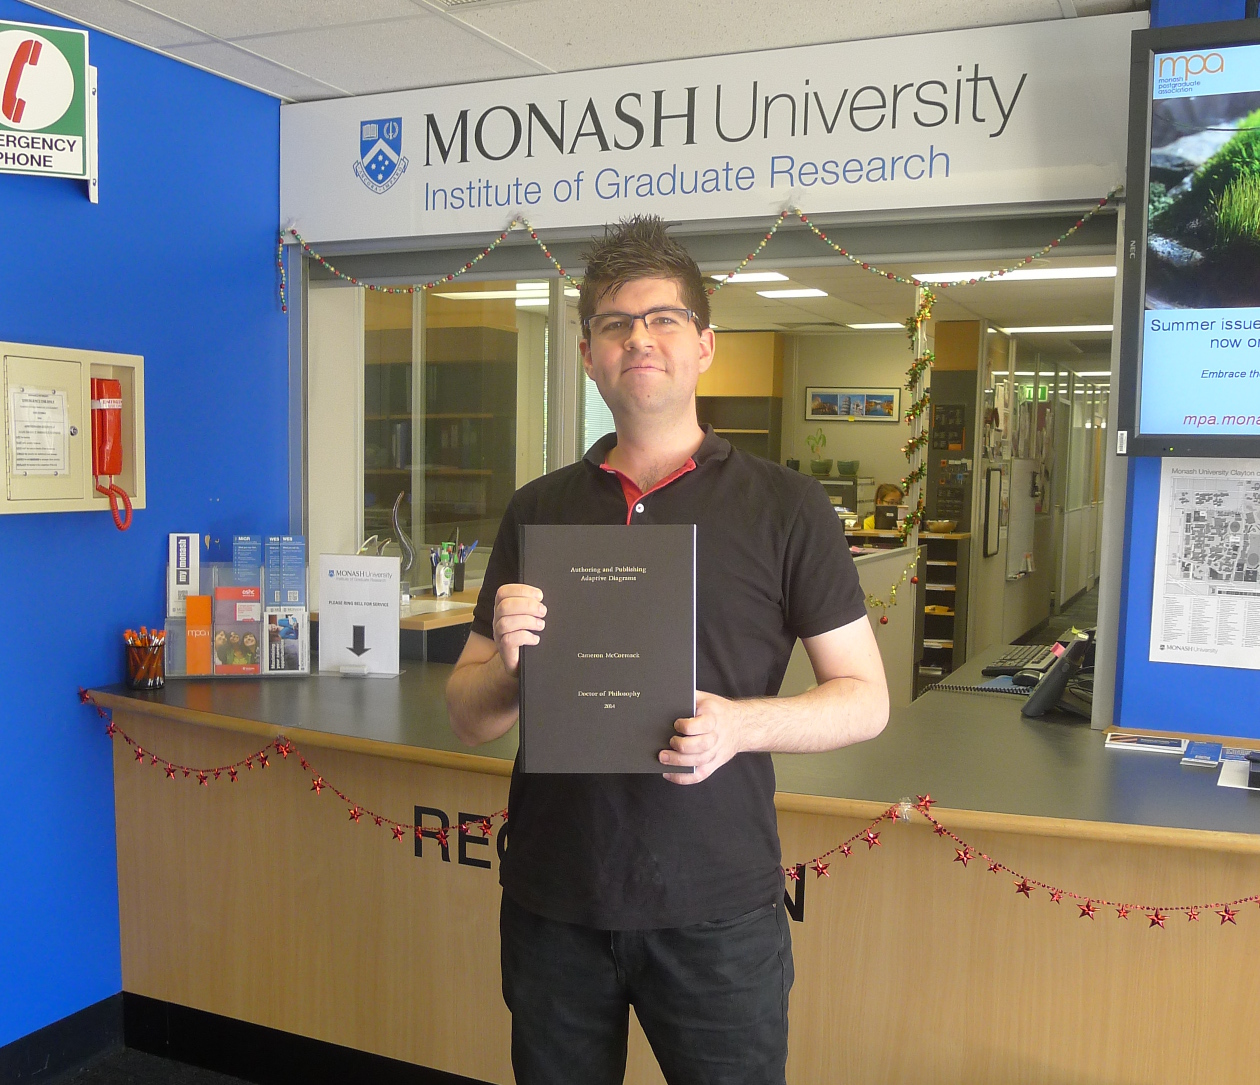 Me submitting my thesis at the Monash Institute of Graduate Research office.